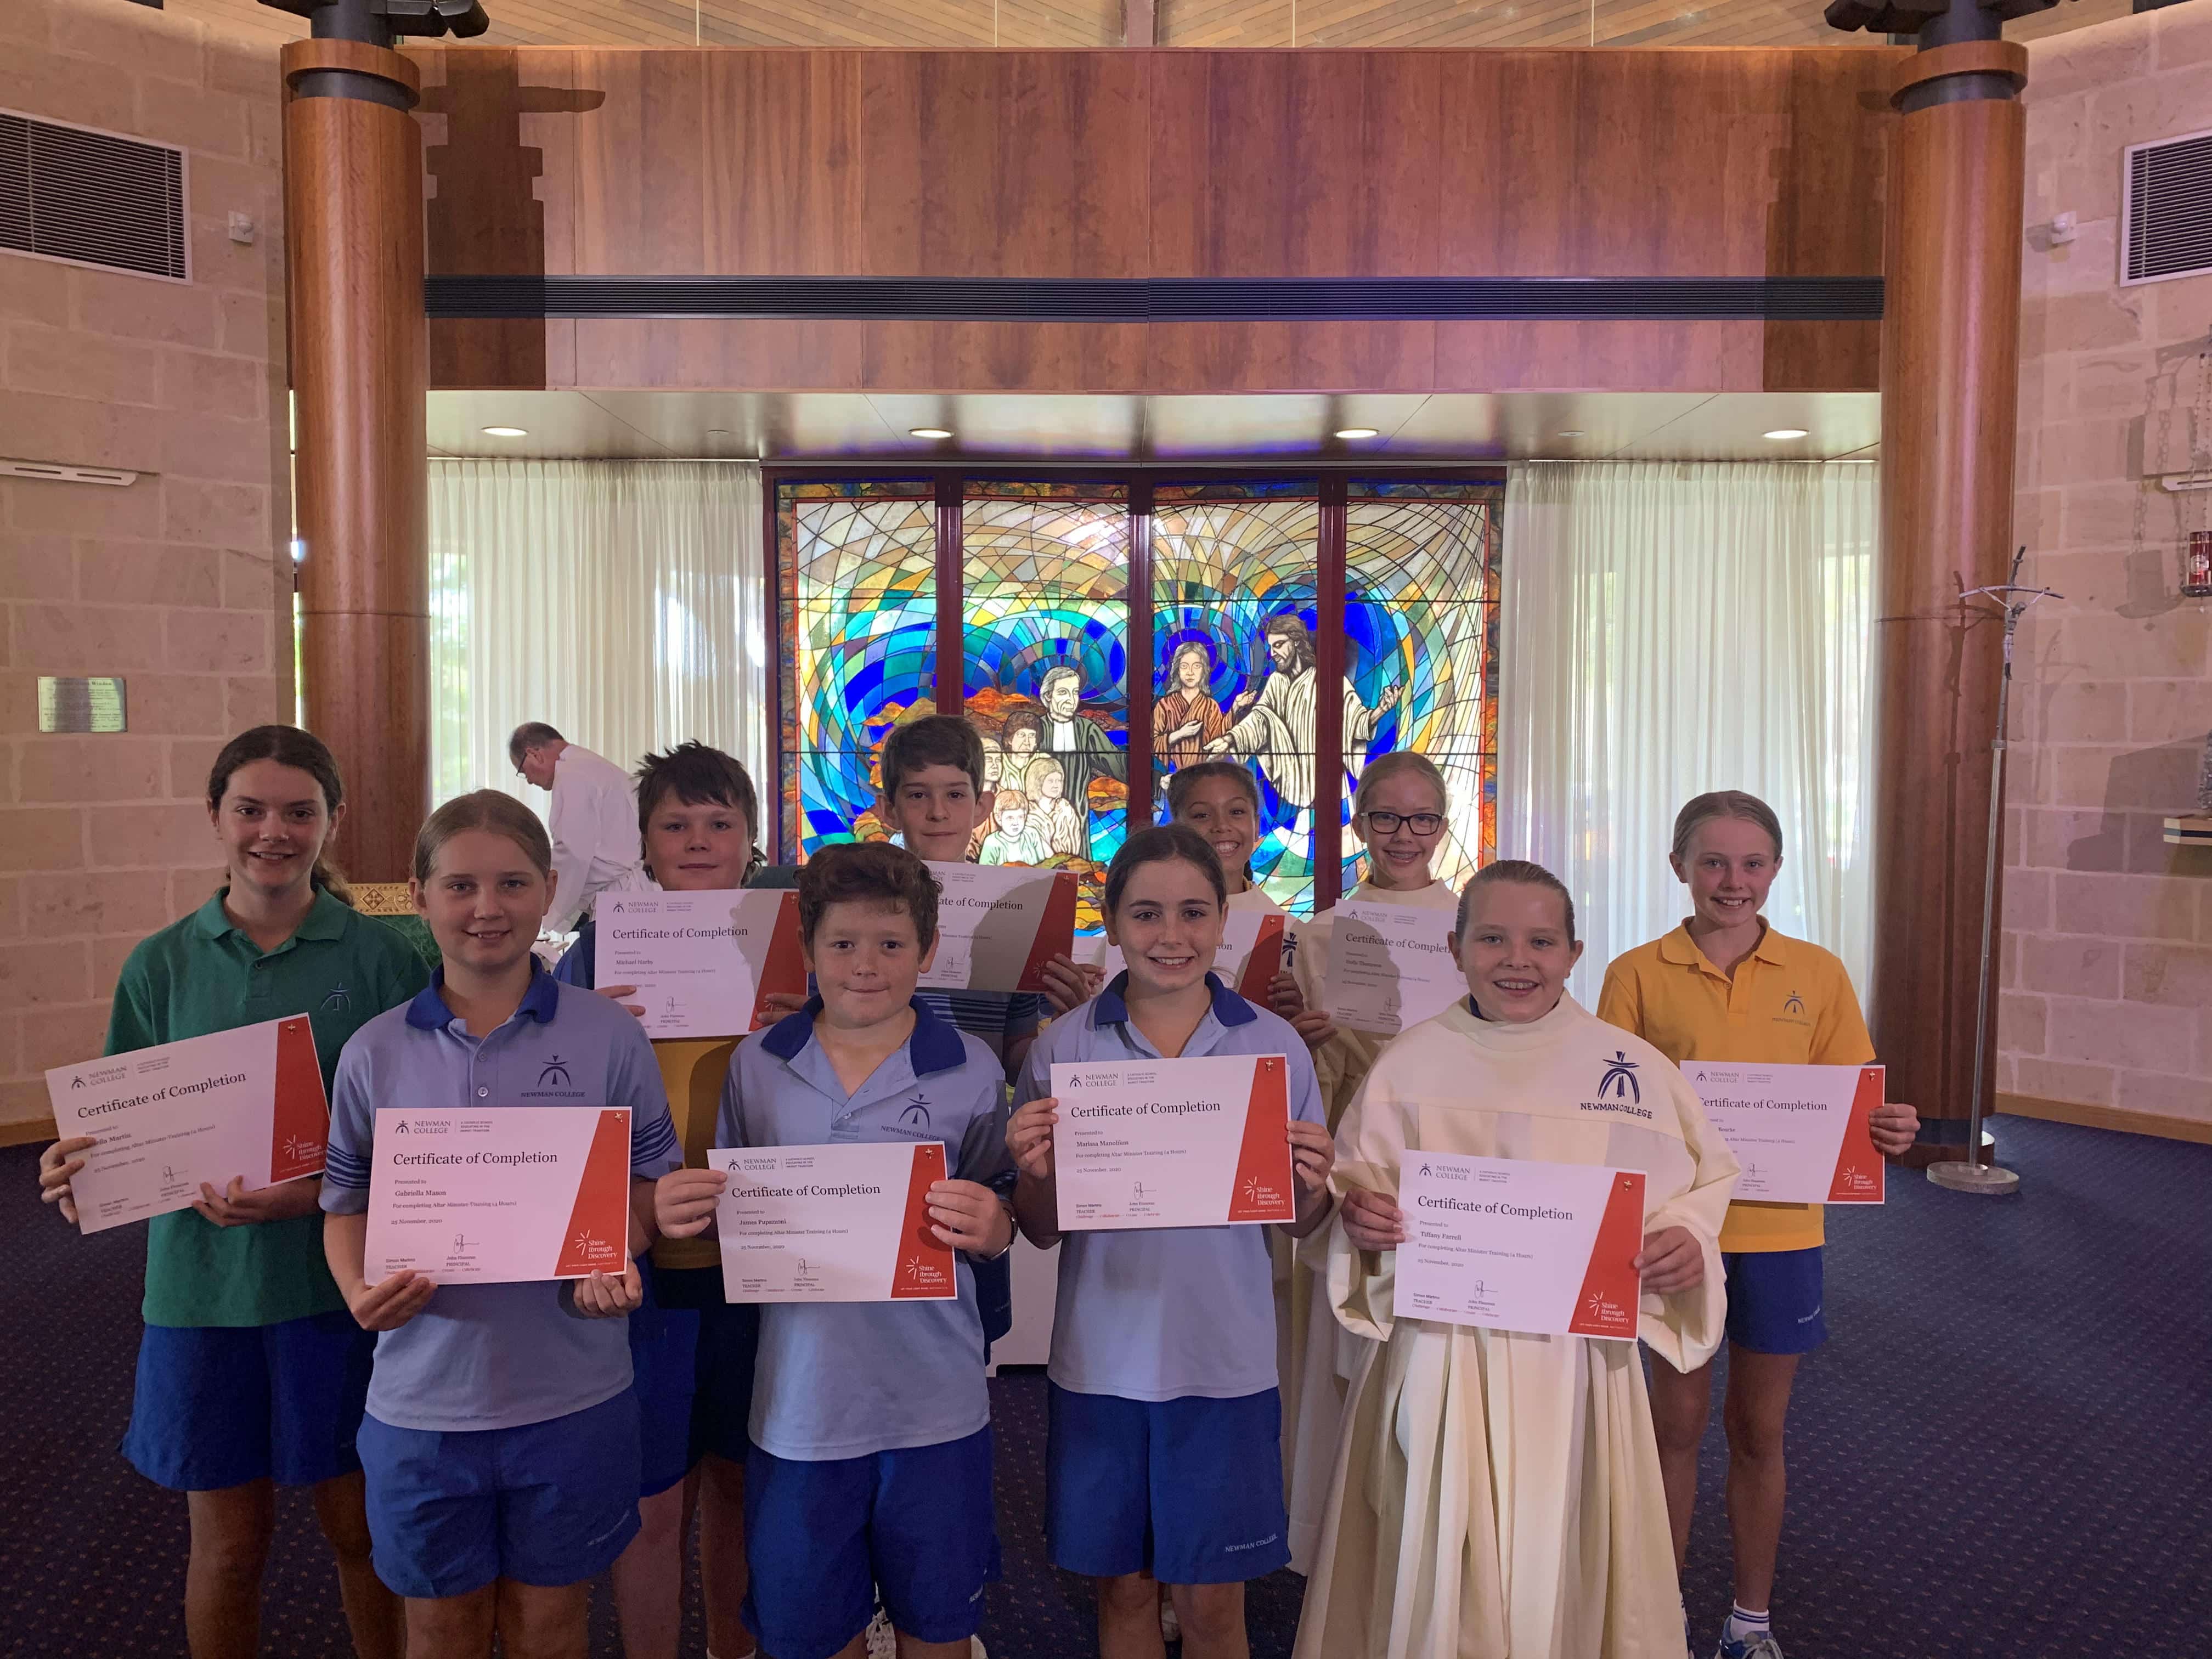 Newman News Term 4 Week 9 2020: From the Leader of Mission and Catholic Identity